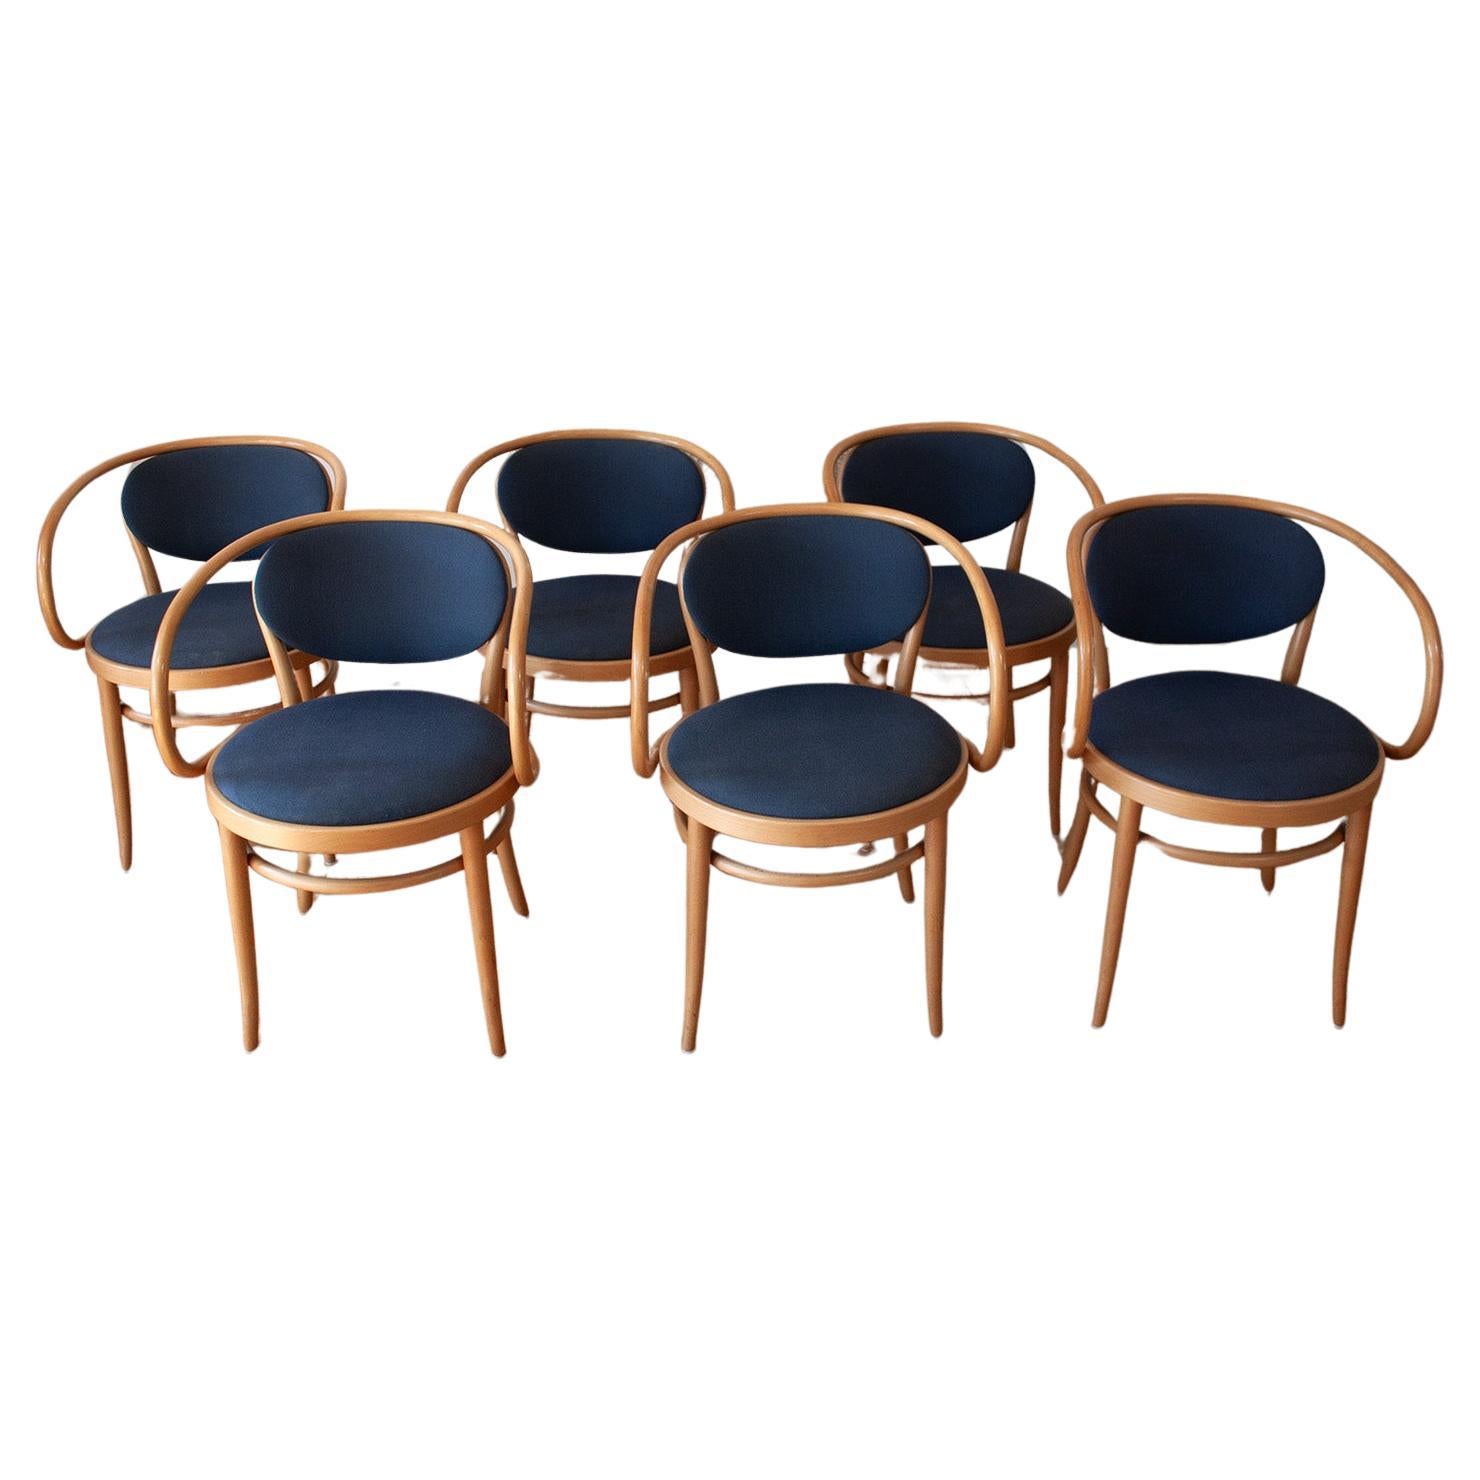 6 Original Thonet 209 Dining chairs with rare blue upholstery For Sale